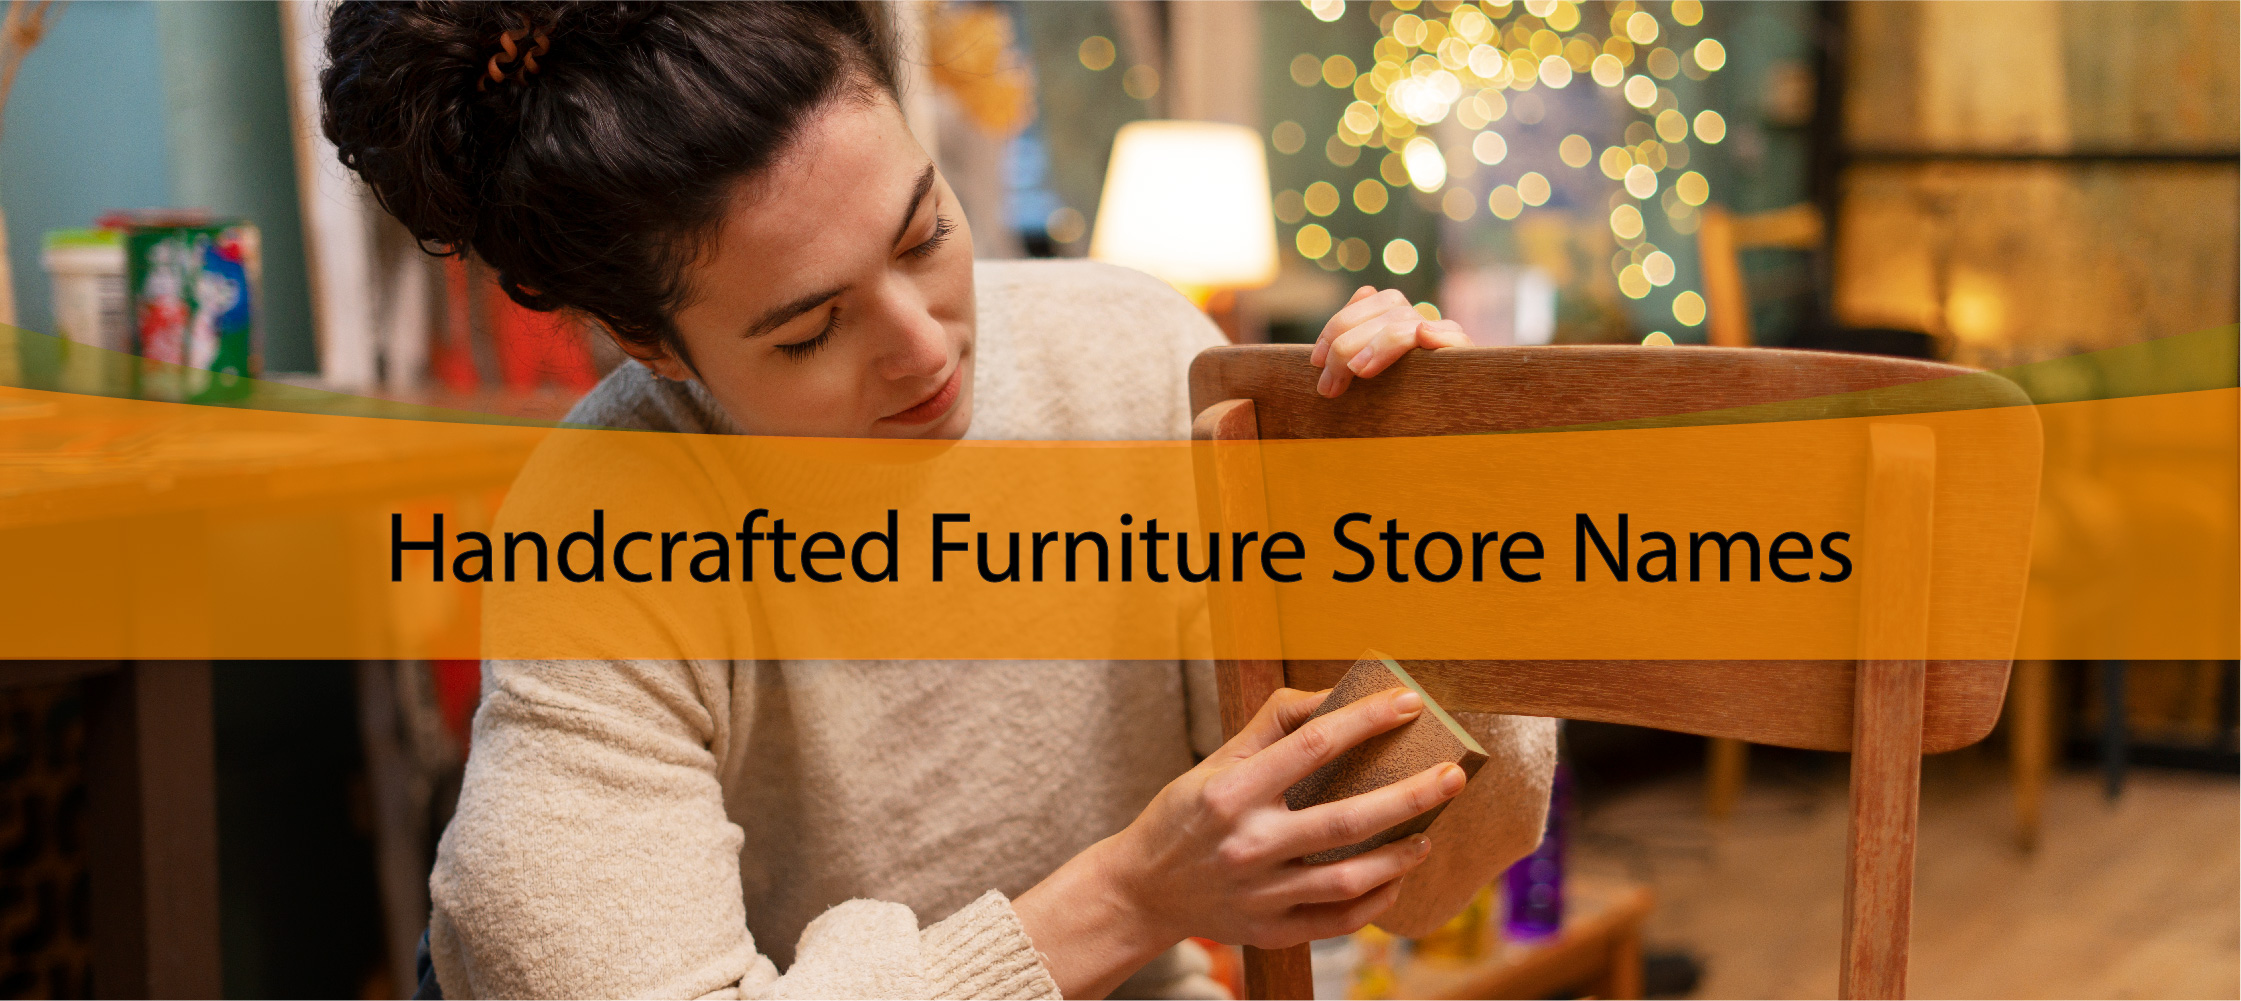 Handcrafted Furniture Store Names